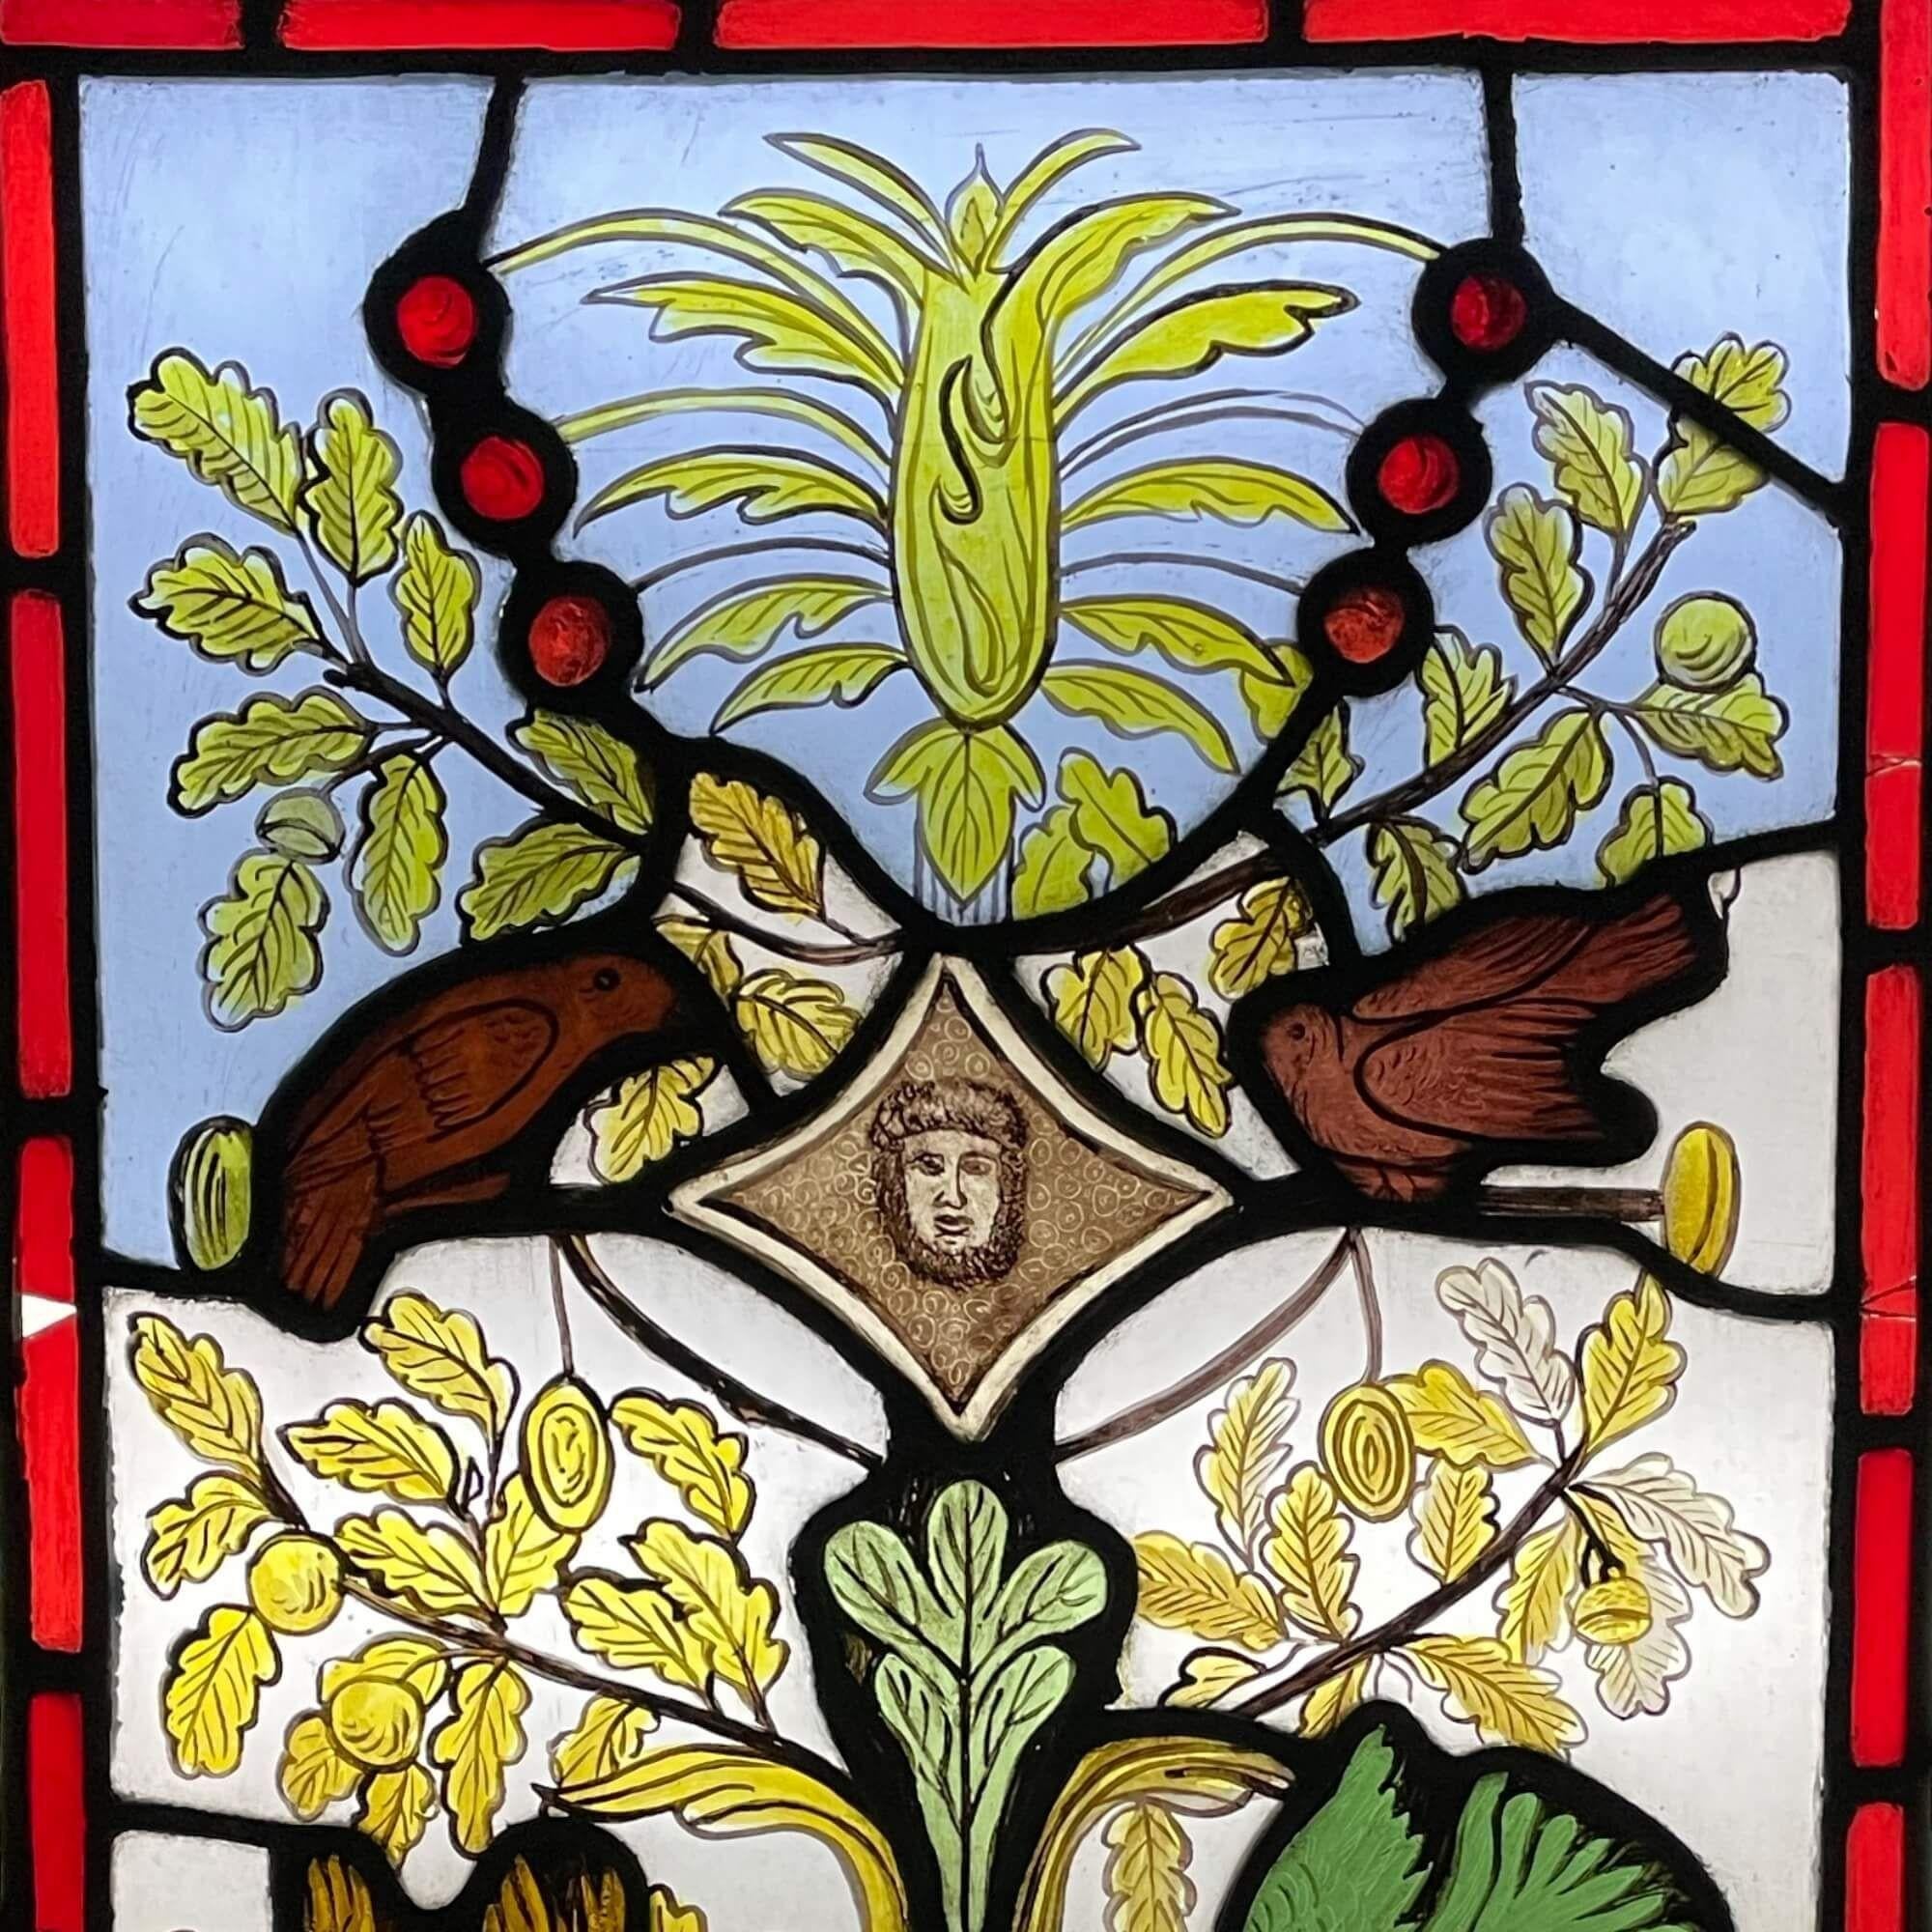 A beautiful late 19th century stained glass window depicting a tree of life style scene. We are also selling two other panels in a similar theme.

Dating to circa 1880, this antique stained glass panel is immersed in colour and intrigue, showcasing